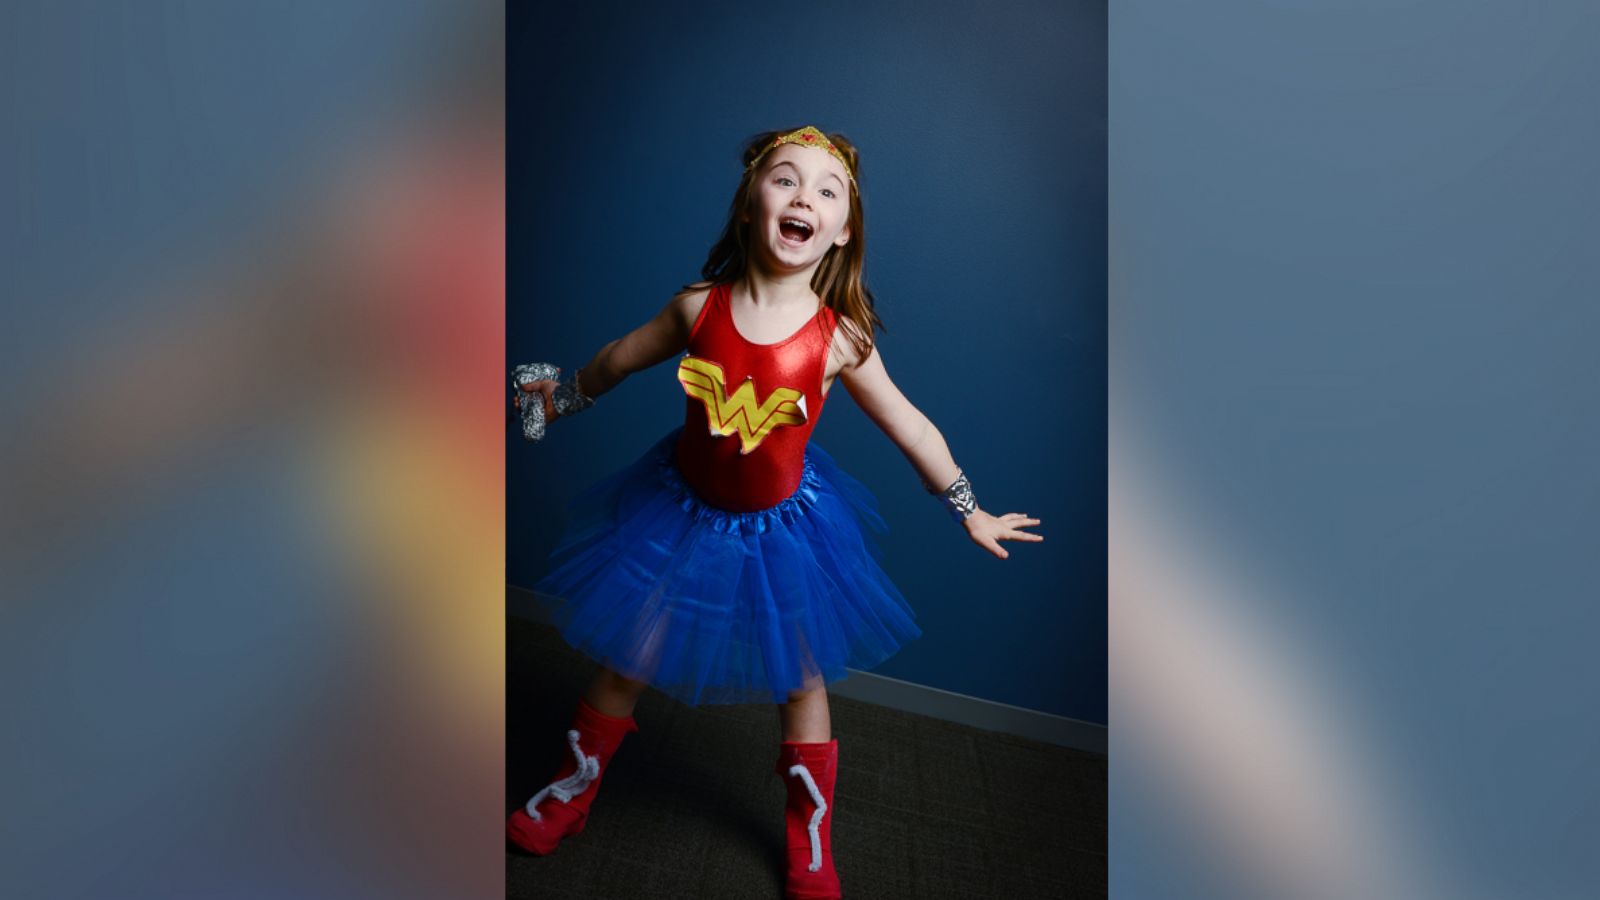 wonder woman boots for child